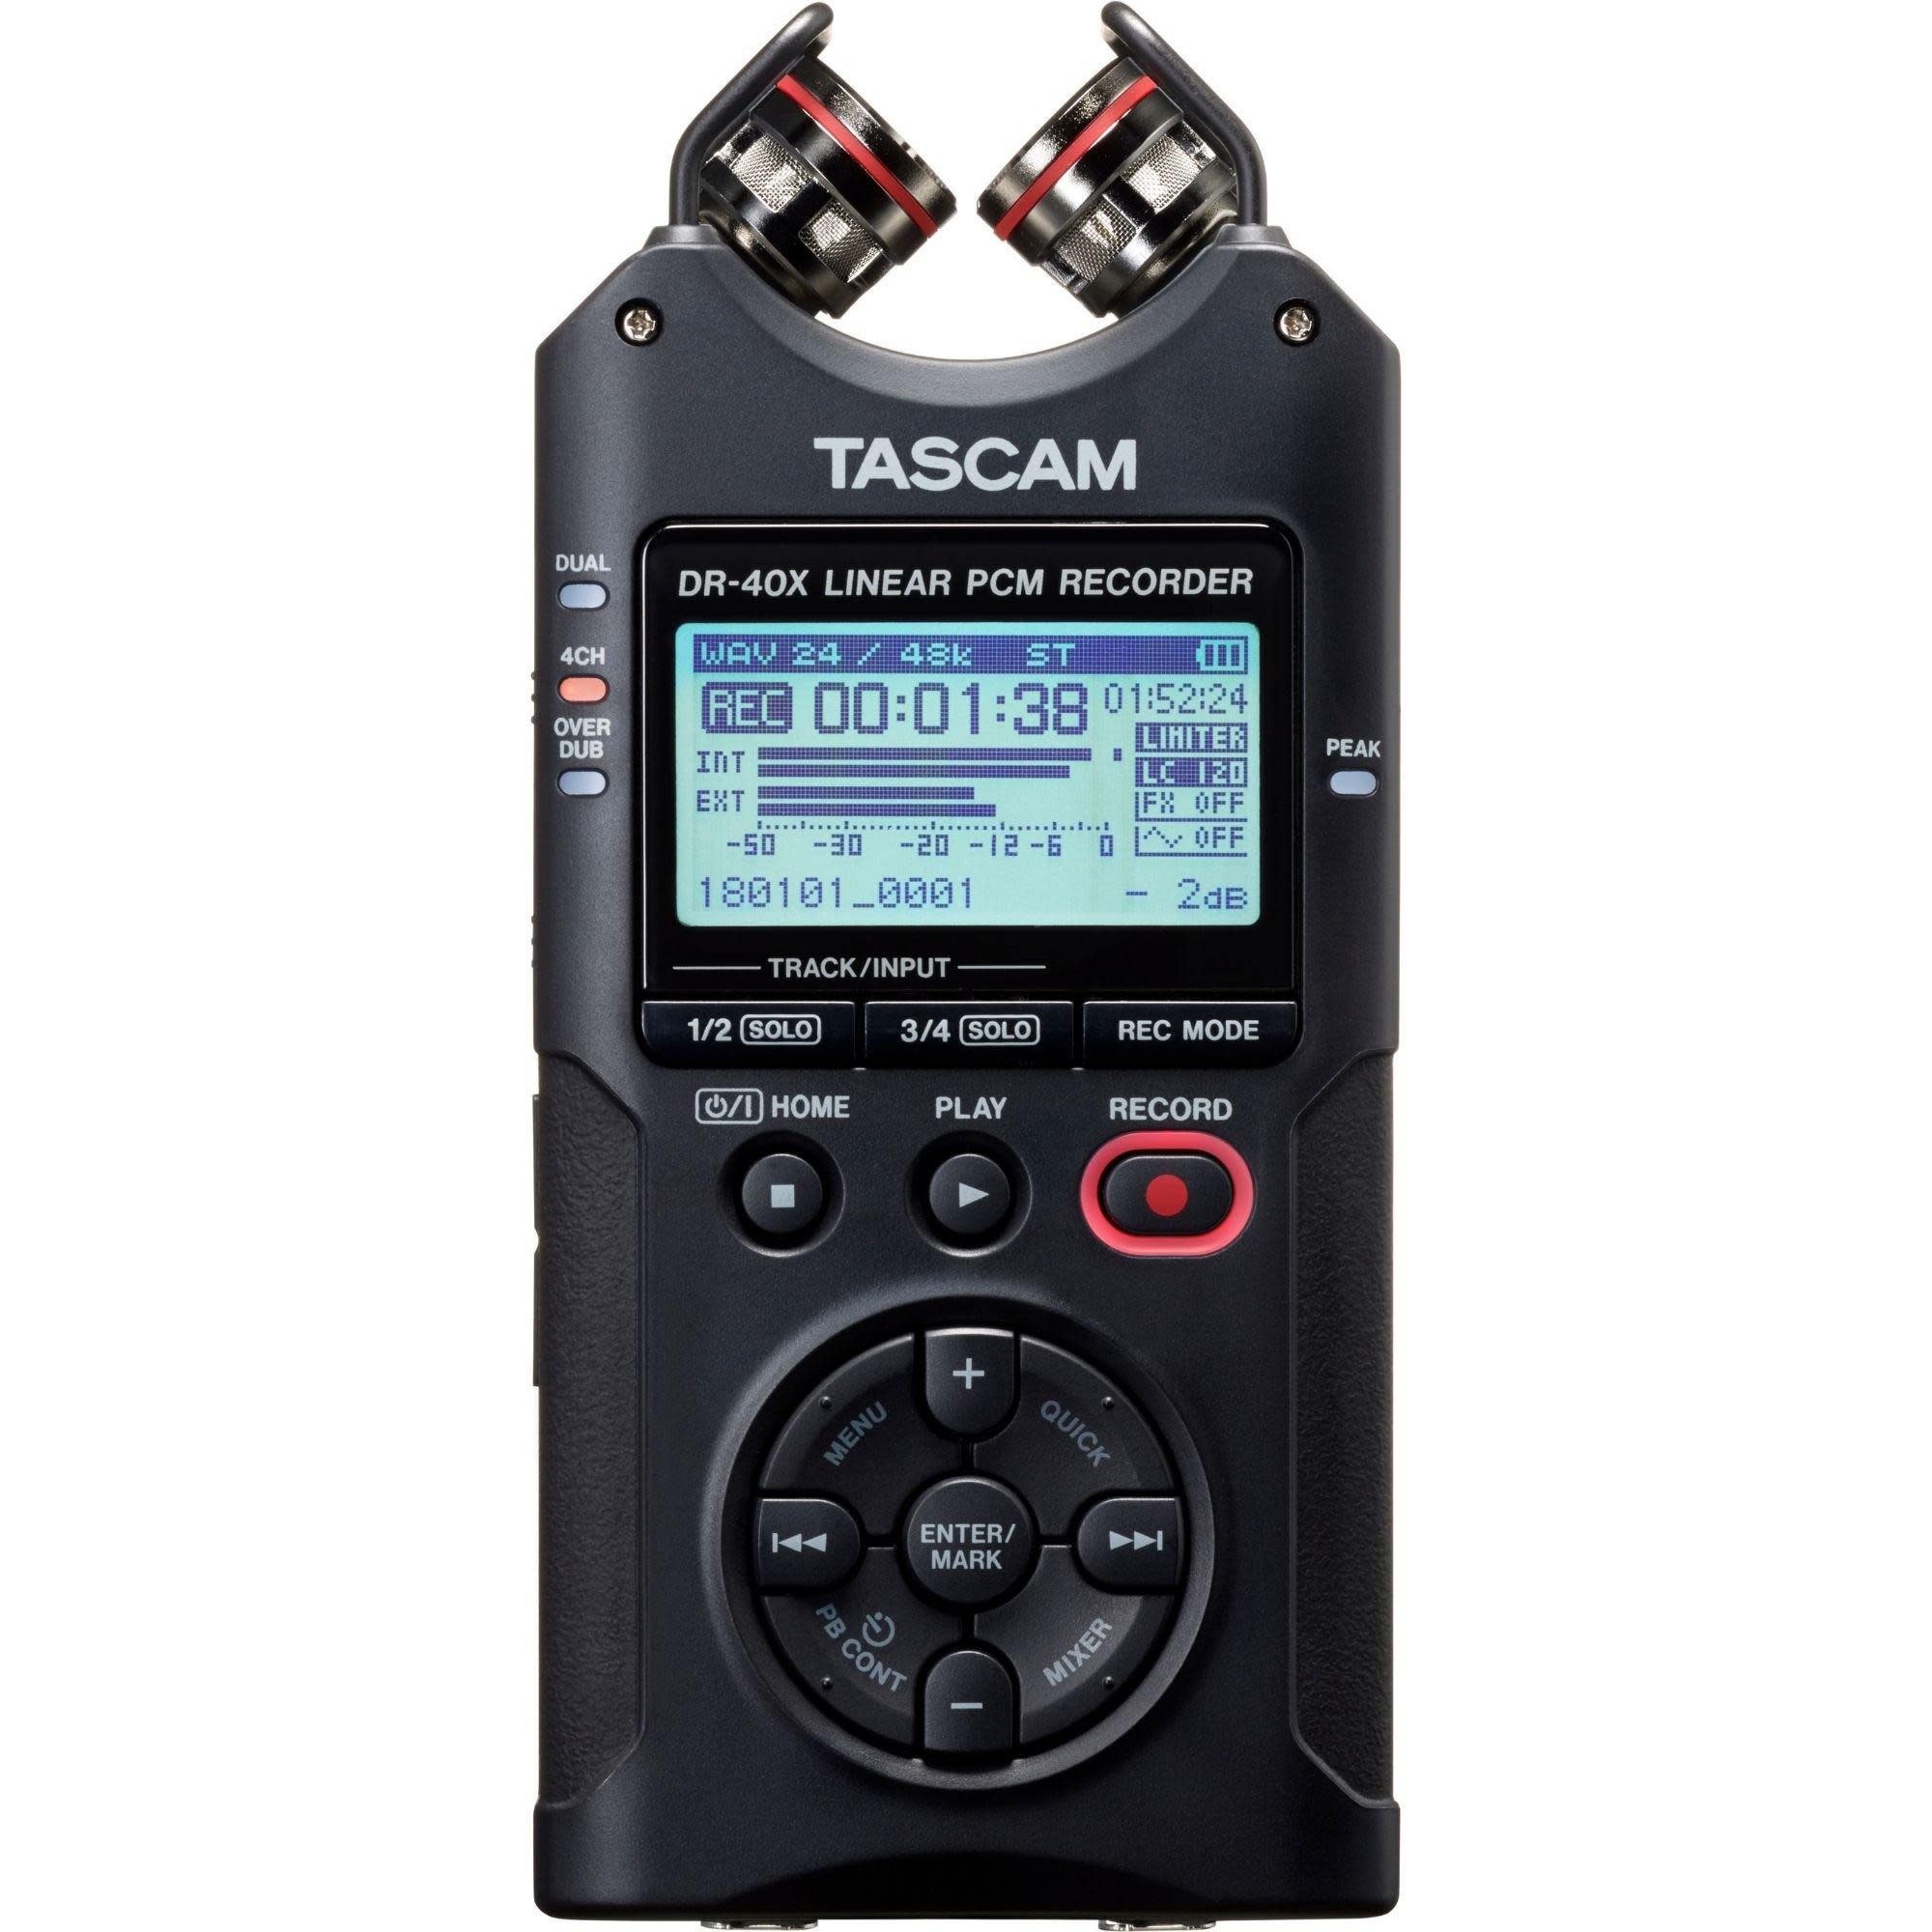 Tascam, Tascam DR-40X Four-Track Digital Audio Recorder and USB Audio Interface, Black